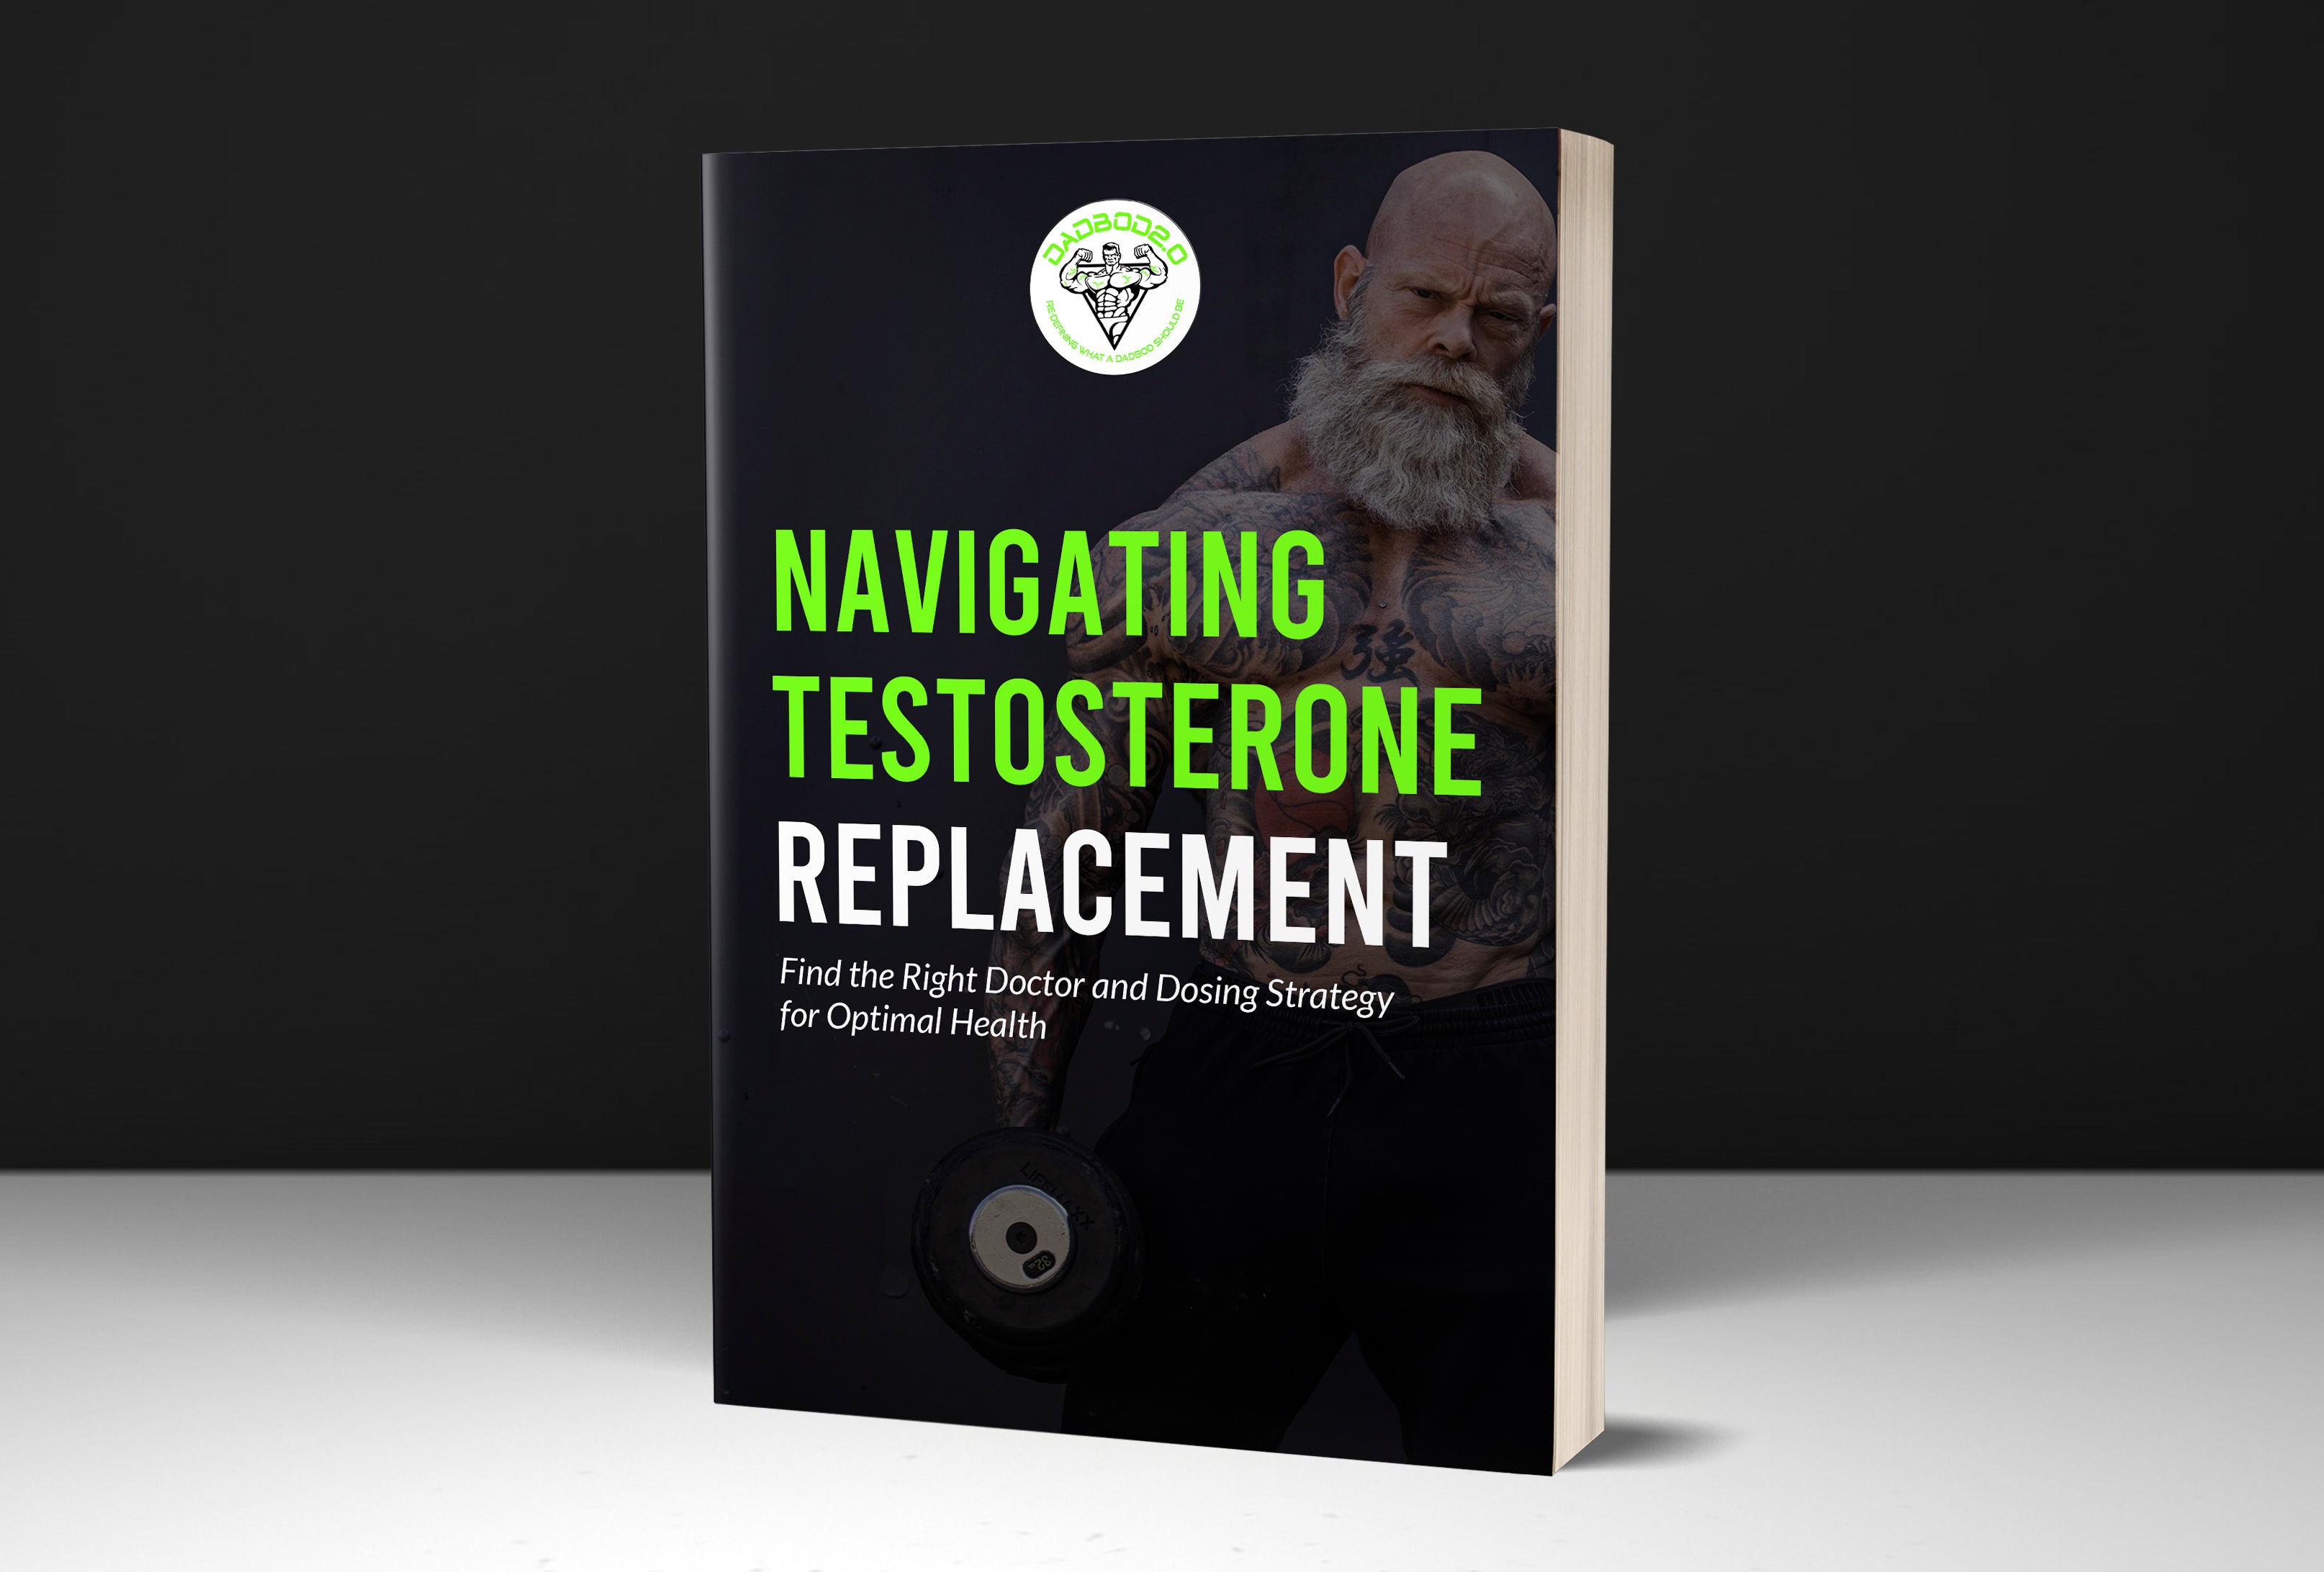 Navigating Testosterone Replacement Therapy